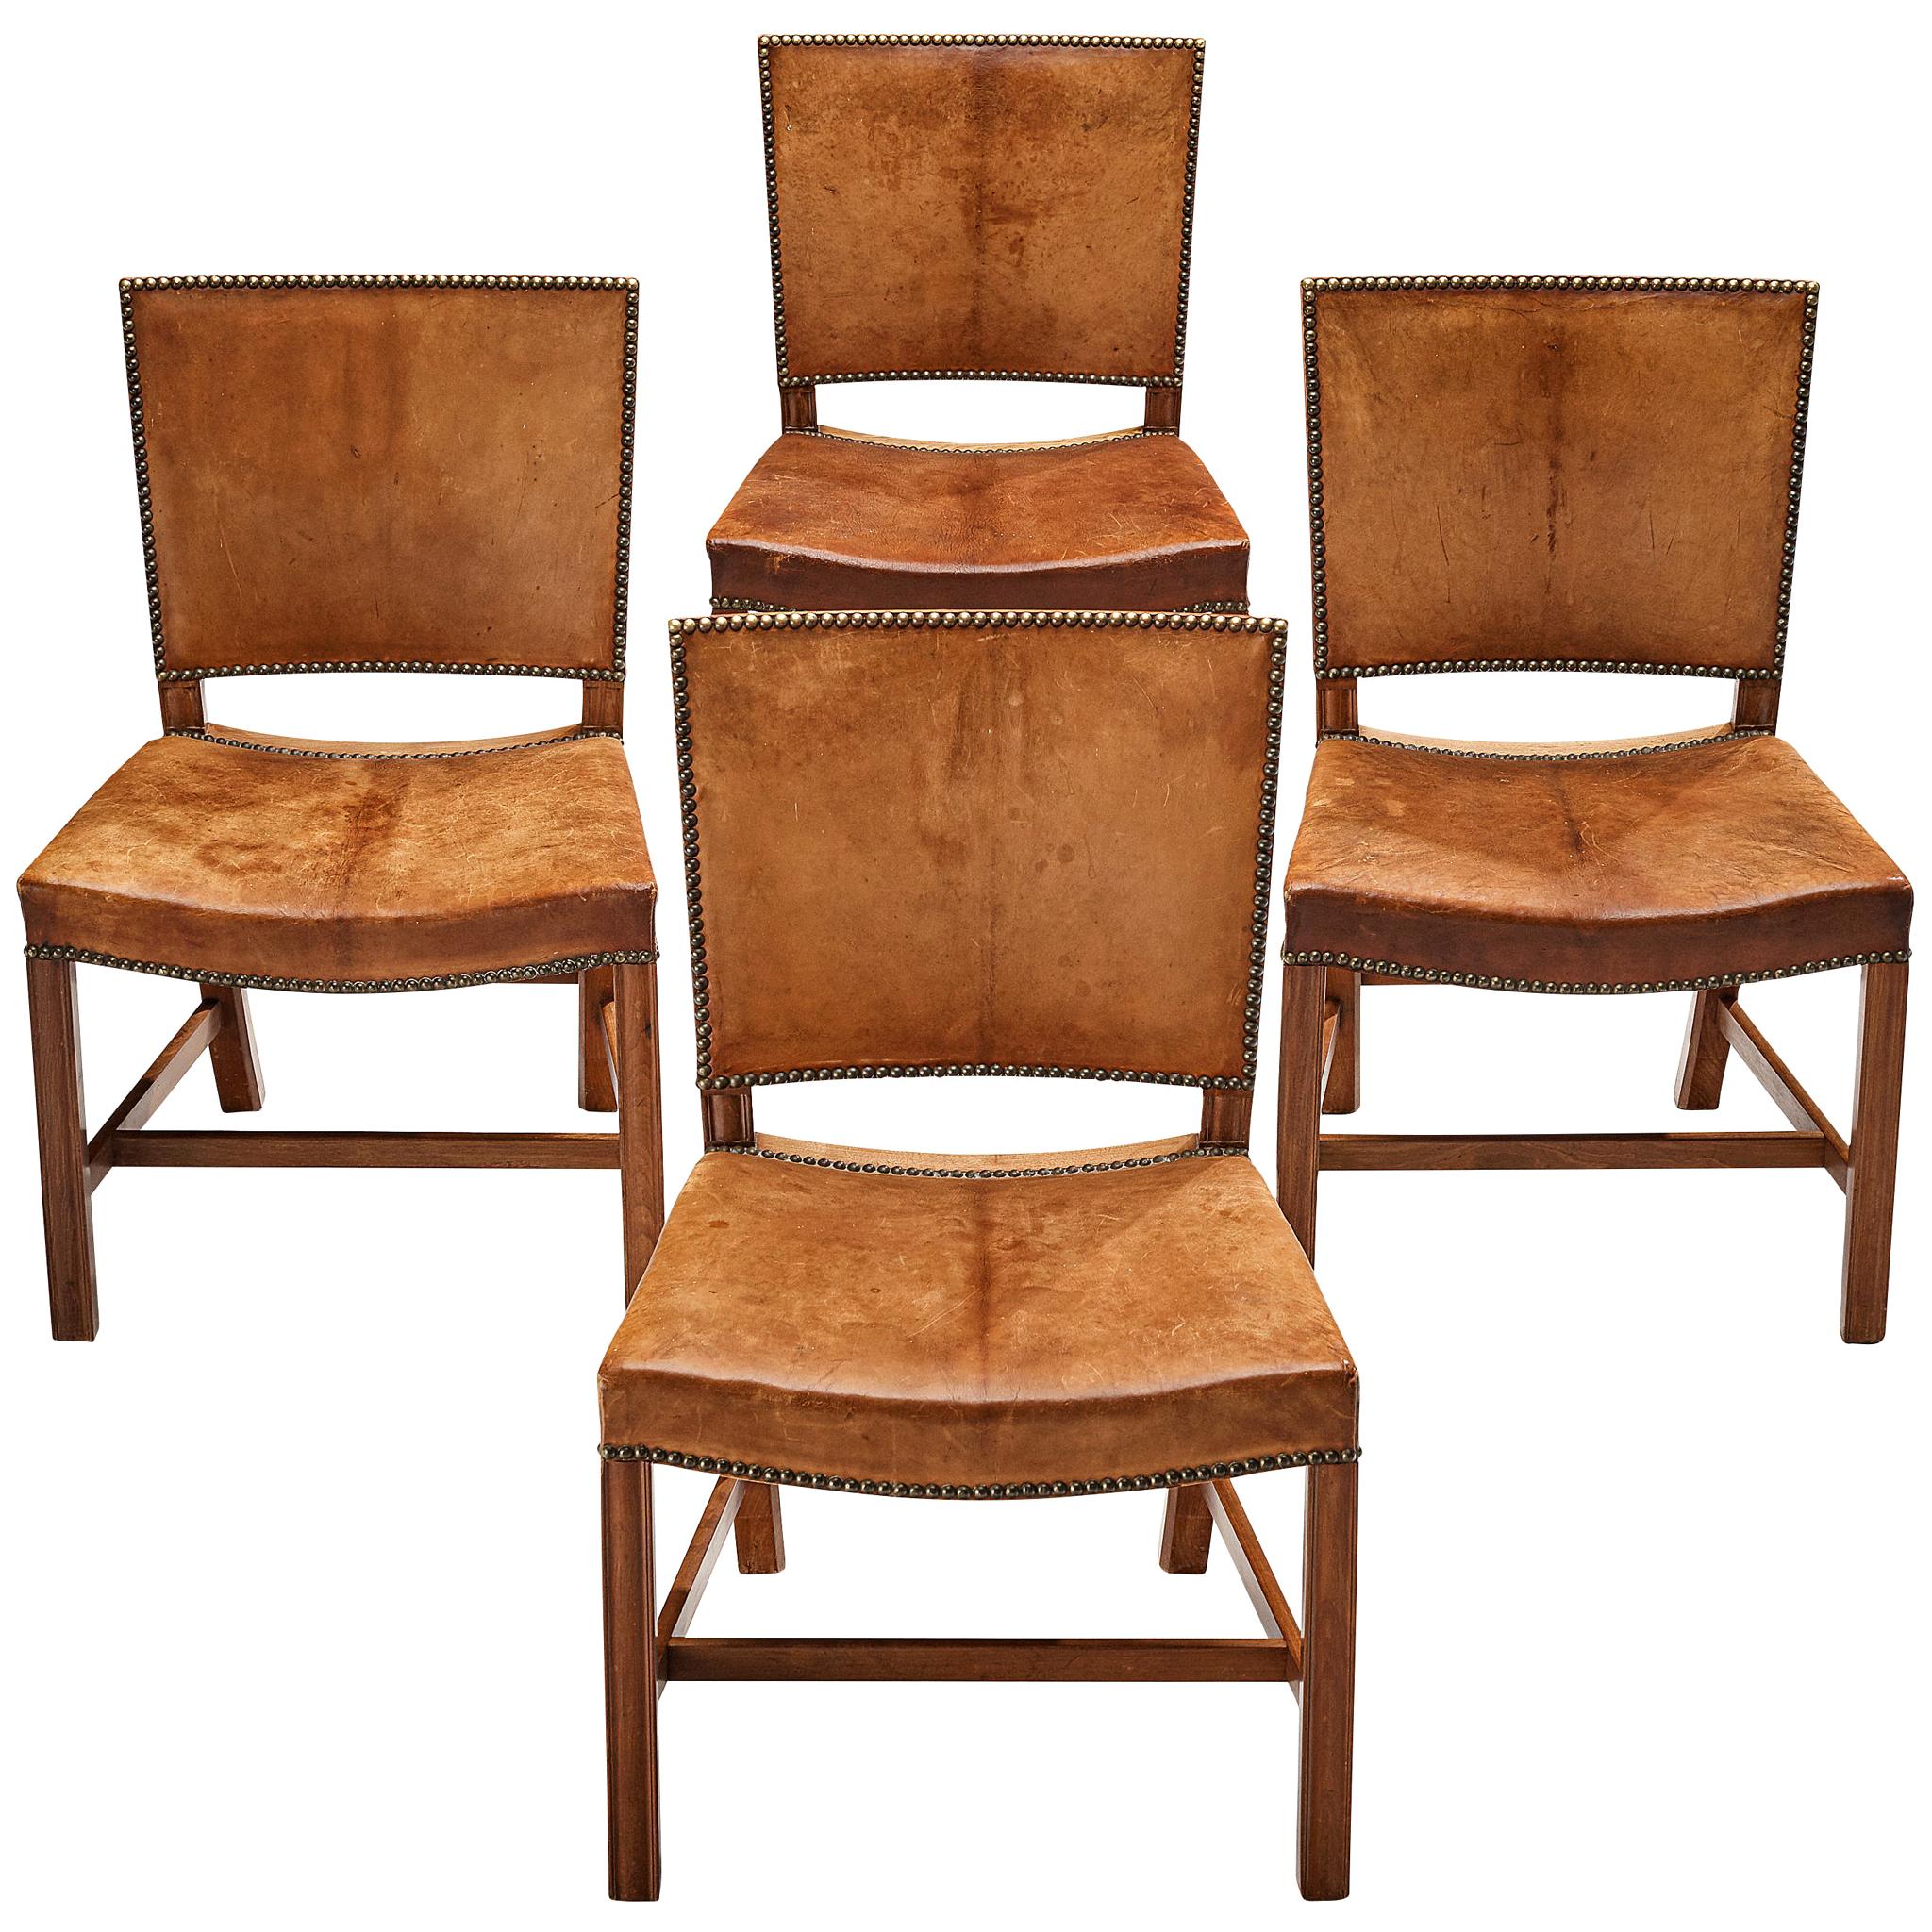 Kaare Klint for Rud Rasmussen Set of Four 'Red Chairs' in Original Leather